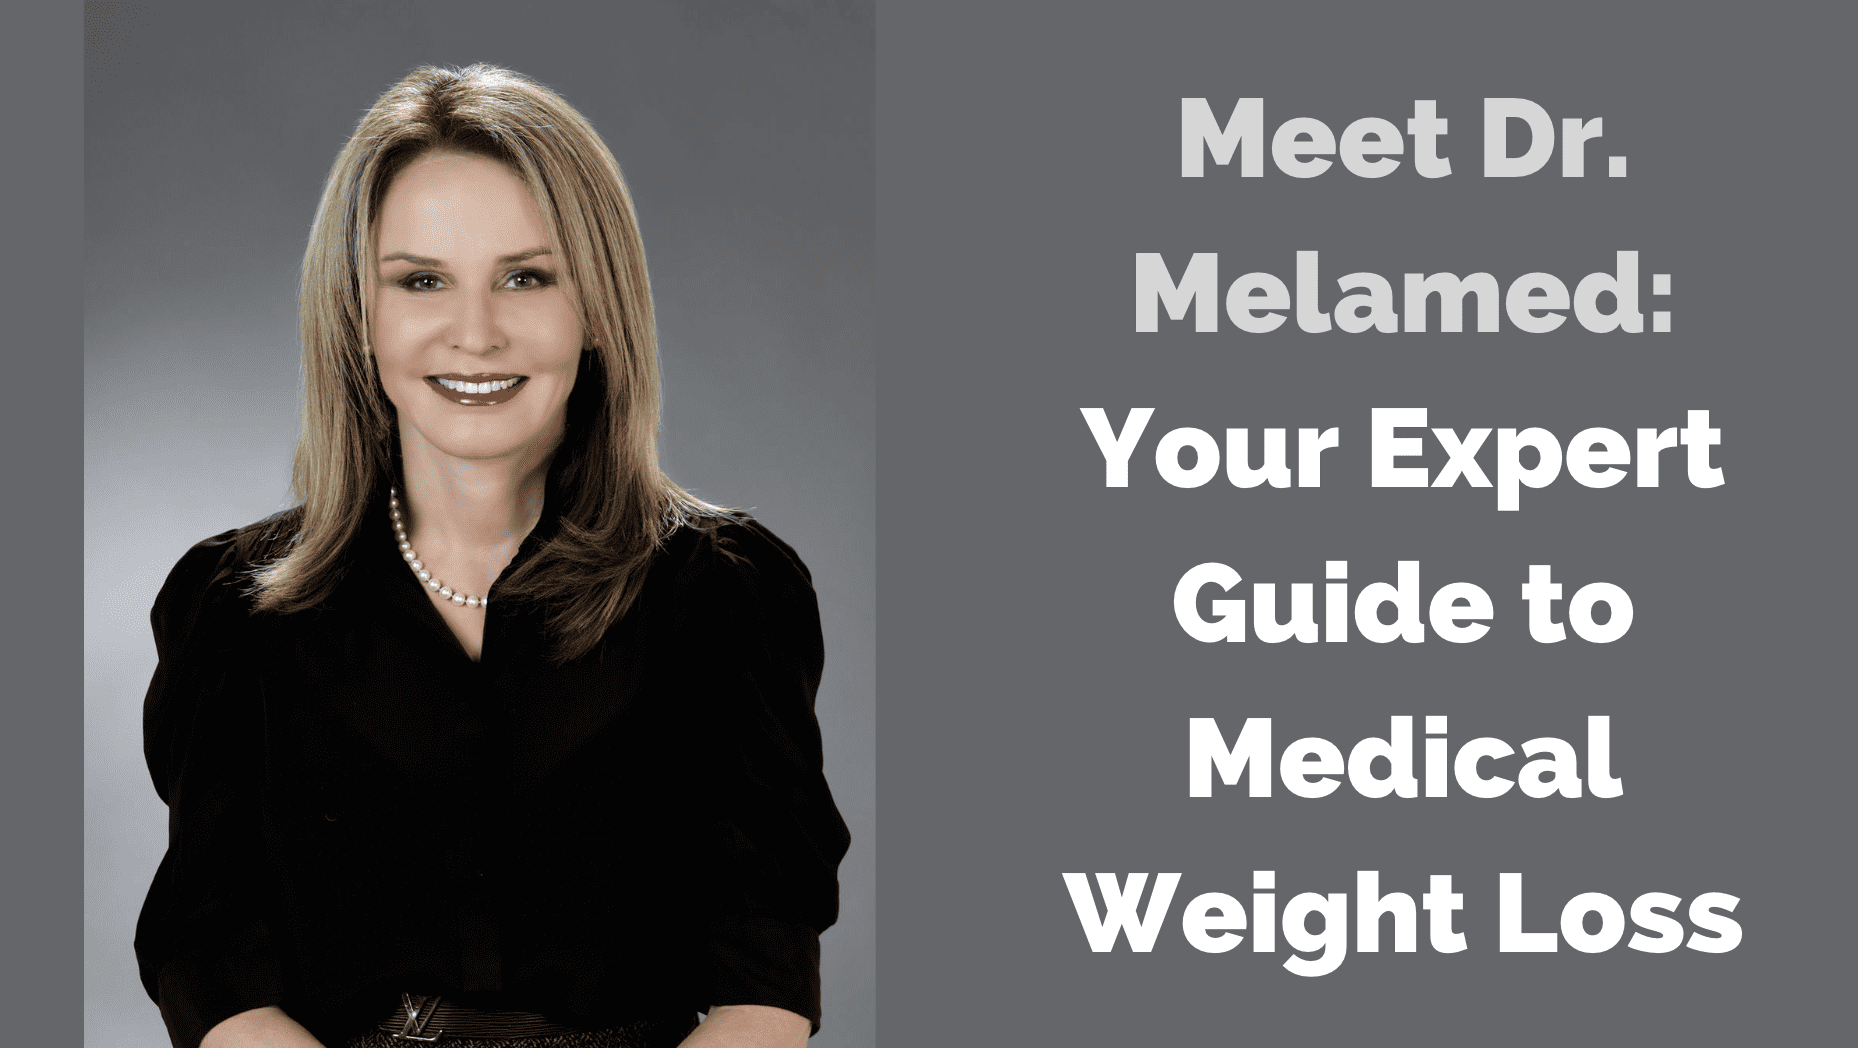 Meet Dr. Melamed: Your Expert Guide to Medical Weight Loss